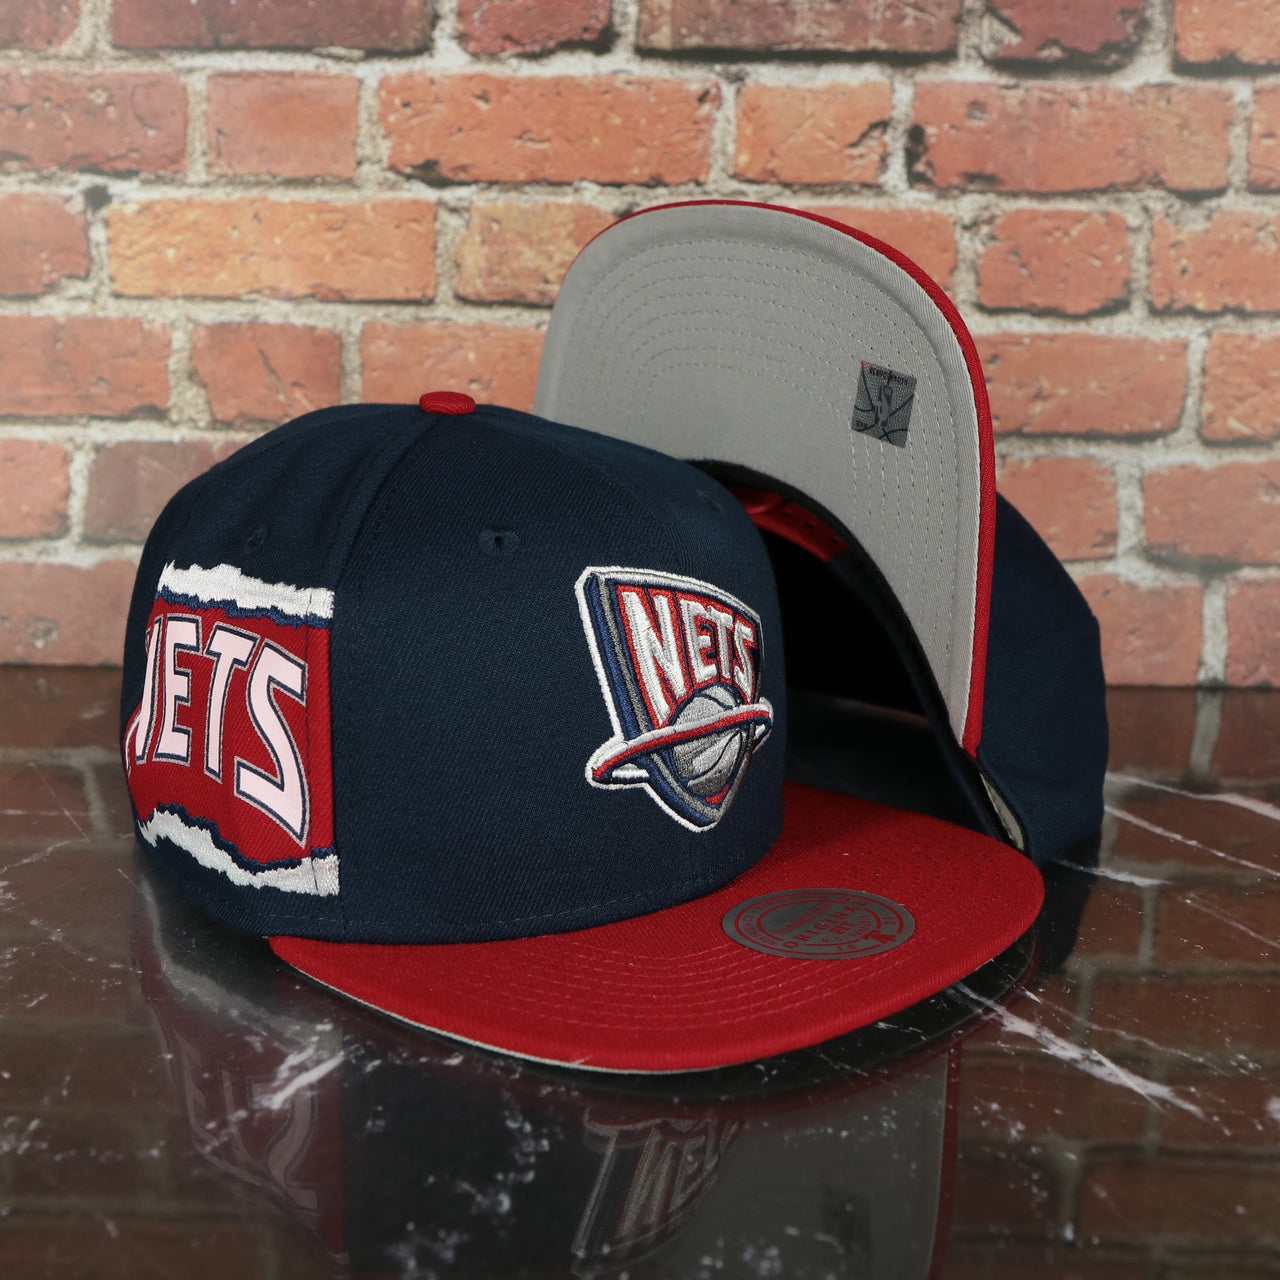 New Jersey Nets Hardwood Classics Jumbotron "Nets" Ripped Wordmark side patch Grey Bottom Navy/Red Snapback hat | Mitchell and Ness Two Tone Snap Cap